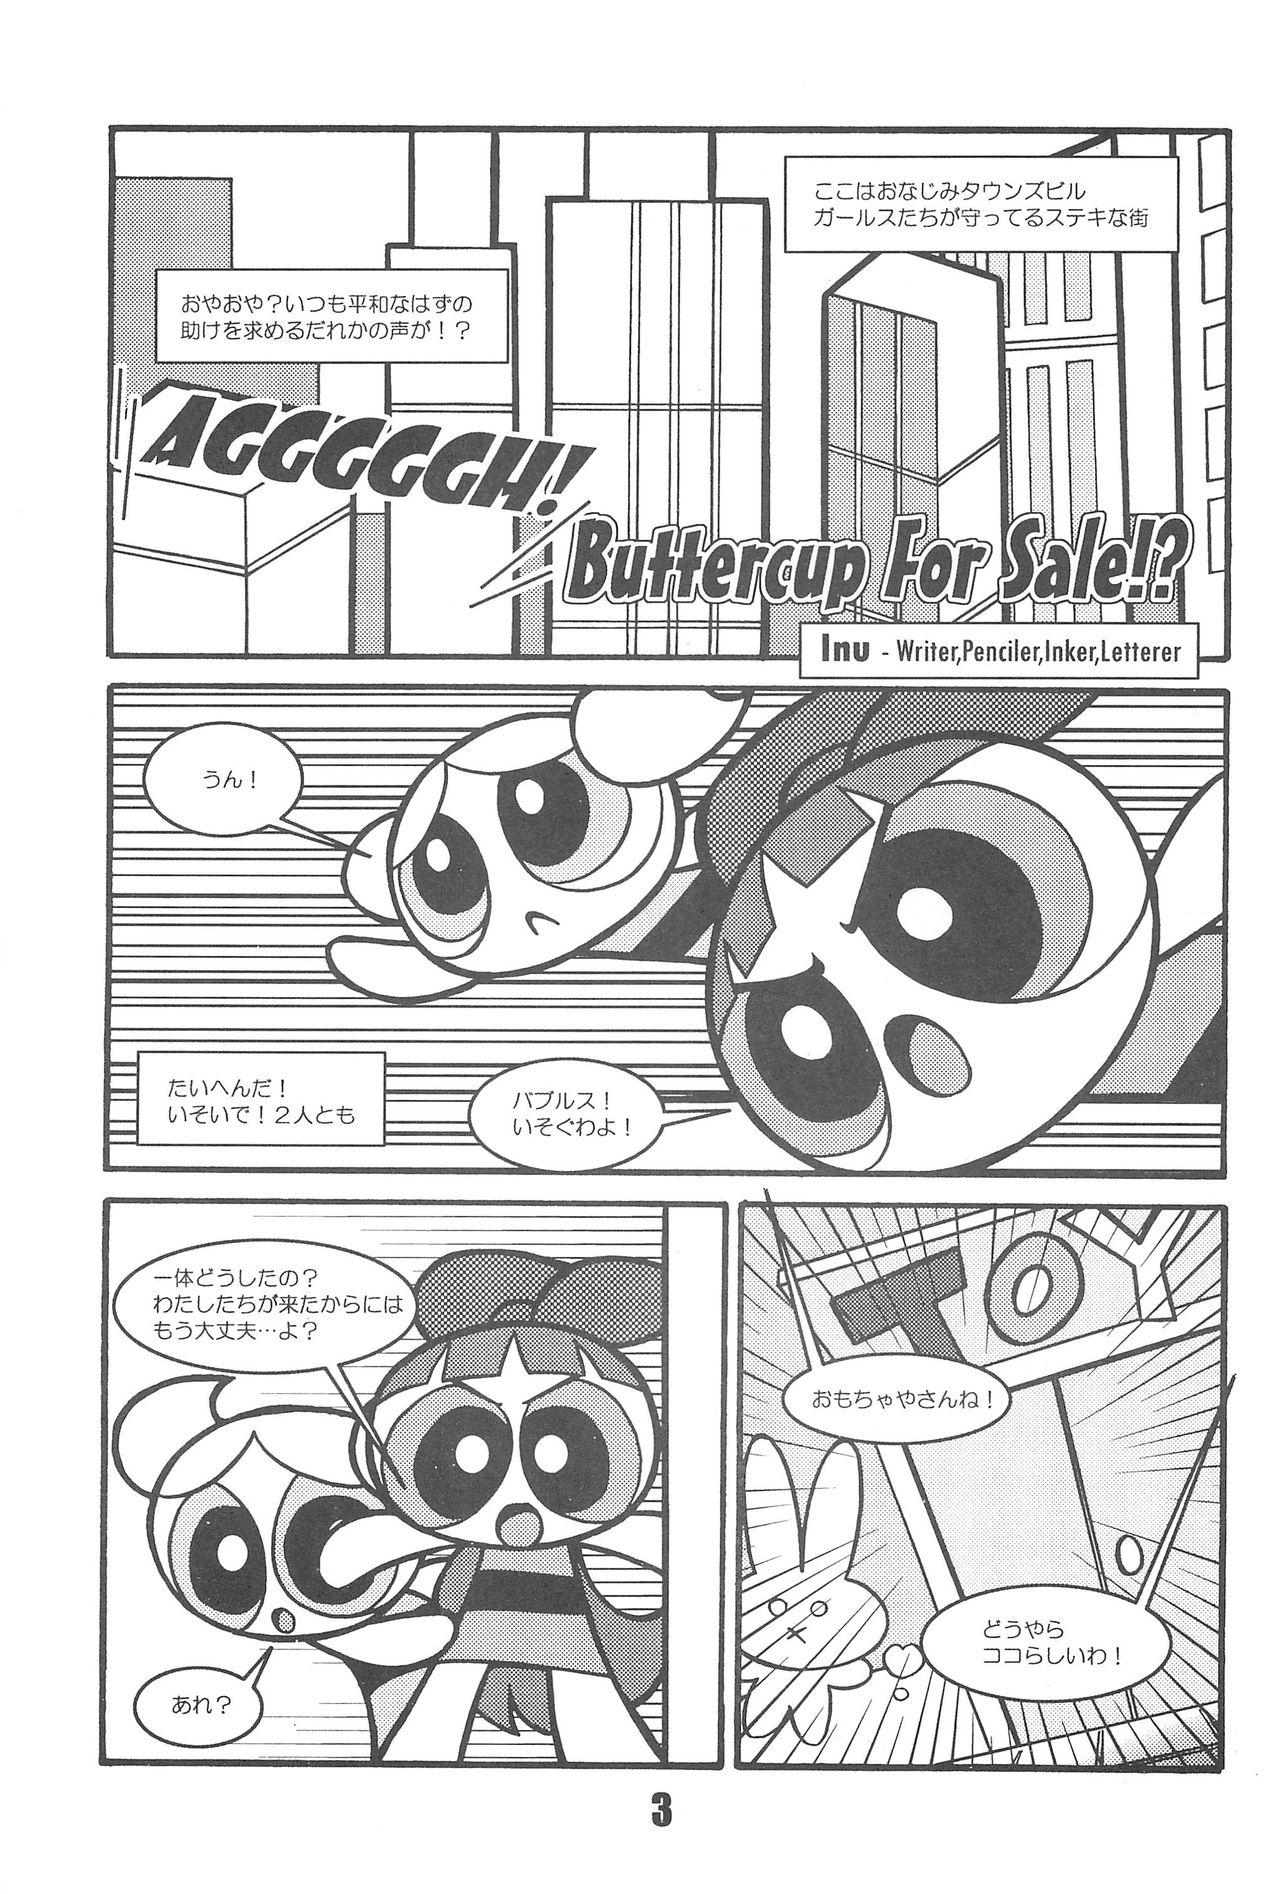 Milk Show Goes On! Funhouse 22th - The powerpuff girls Sola - Page 3